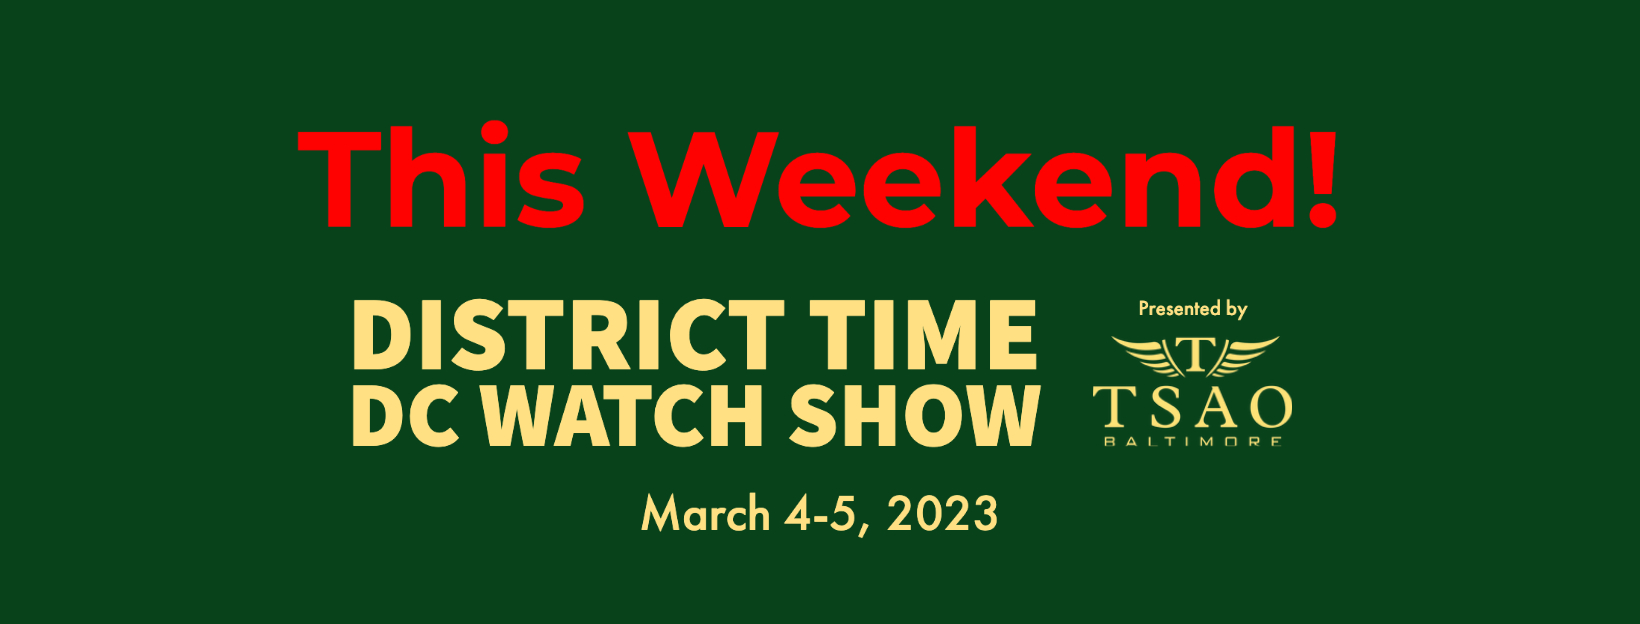 District Time 2023 – This Weekend!